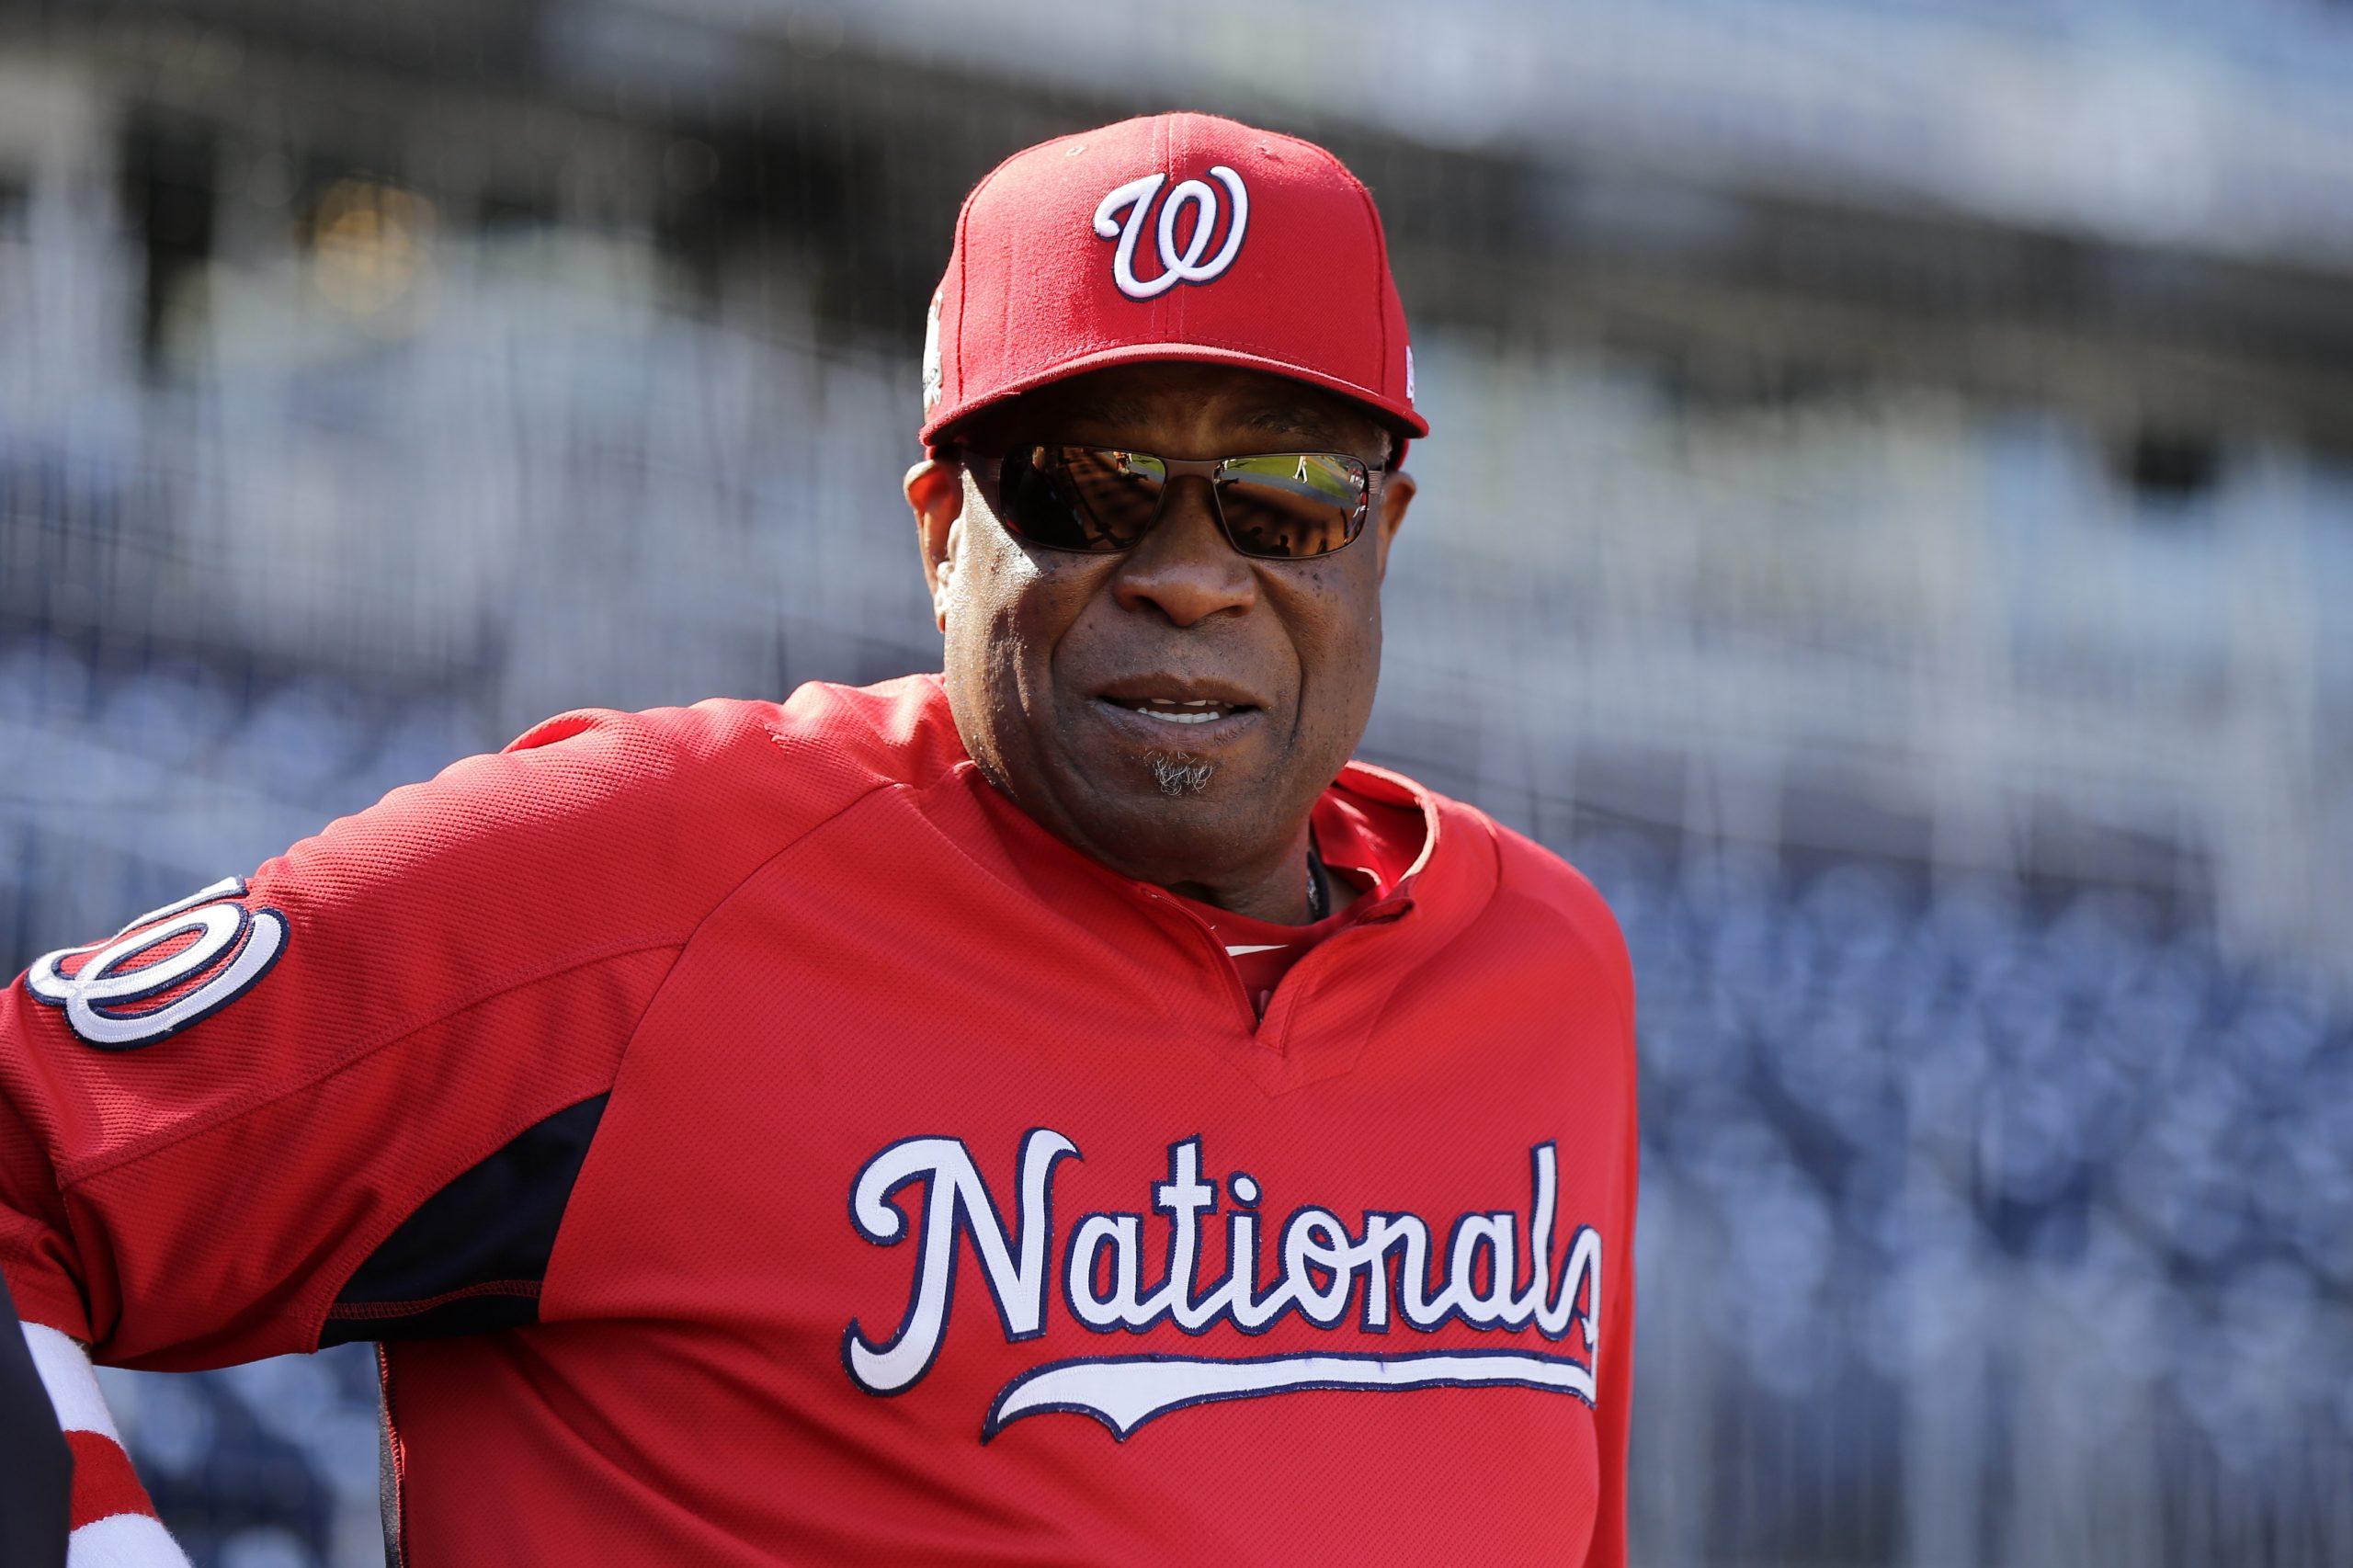 Dusty Baker's son drafted by Nationals